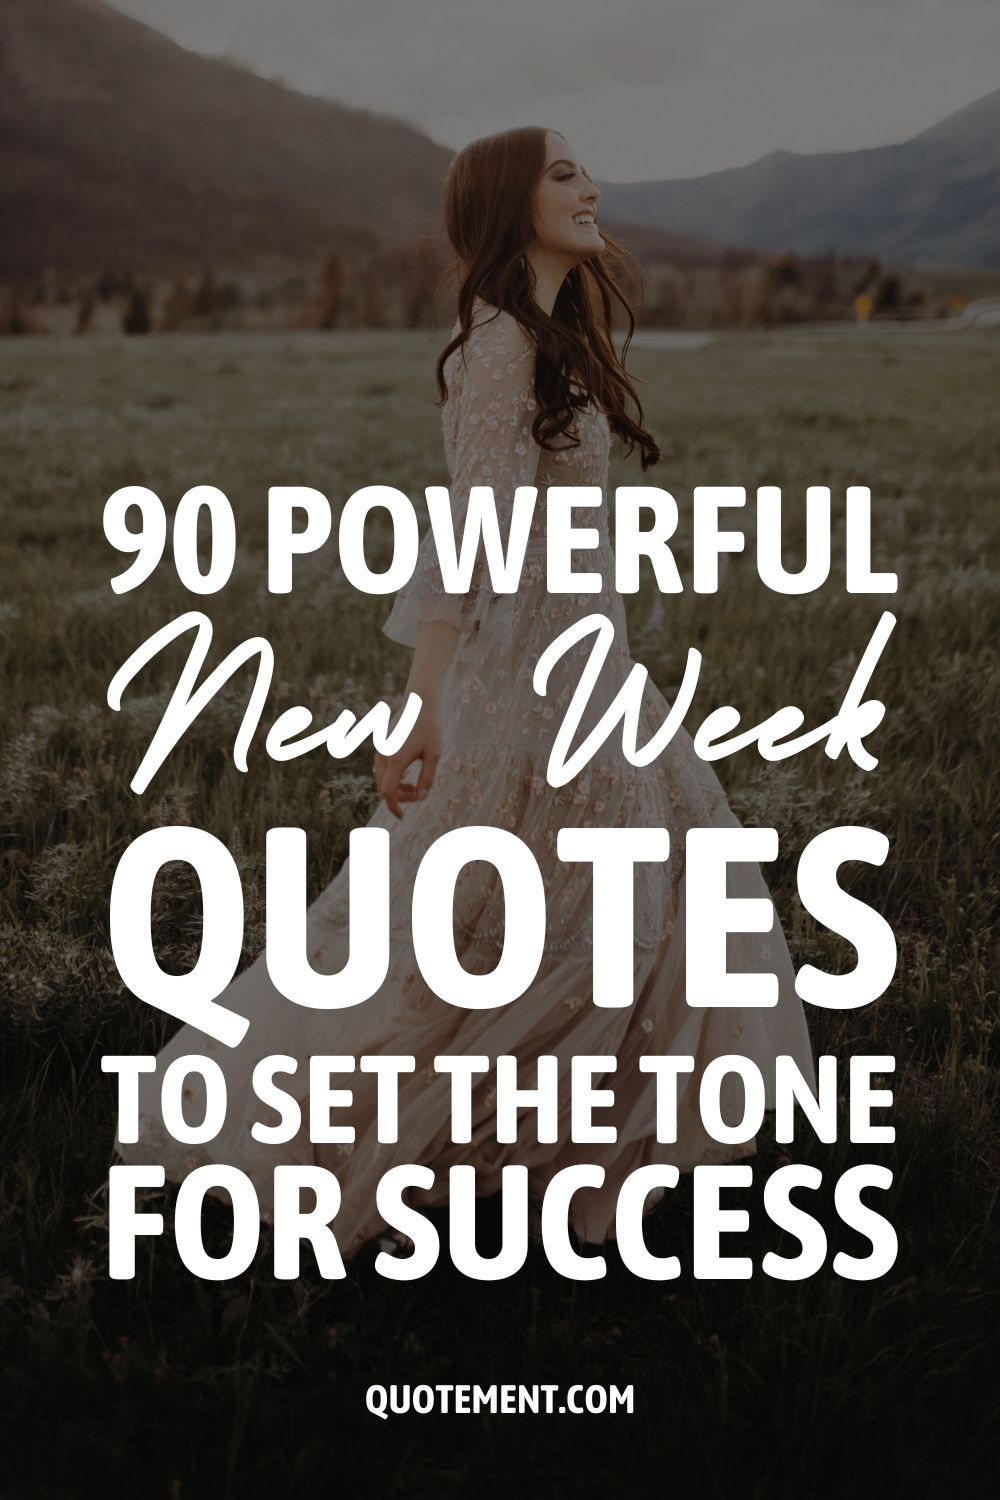 90 Powerful New Week Quotes To Set The Tone For Success 